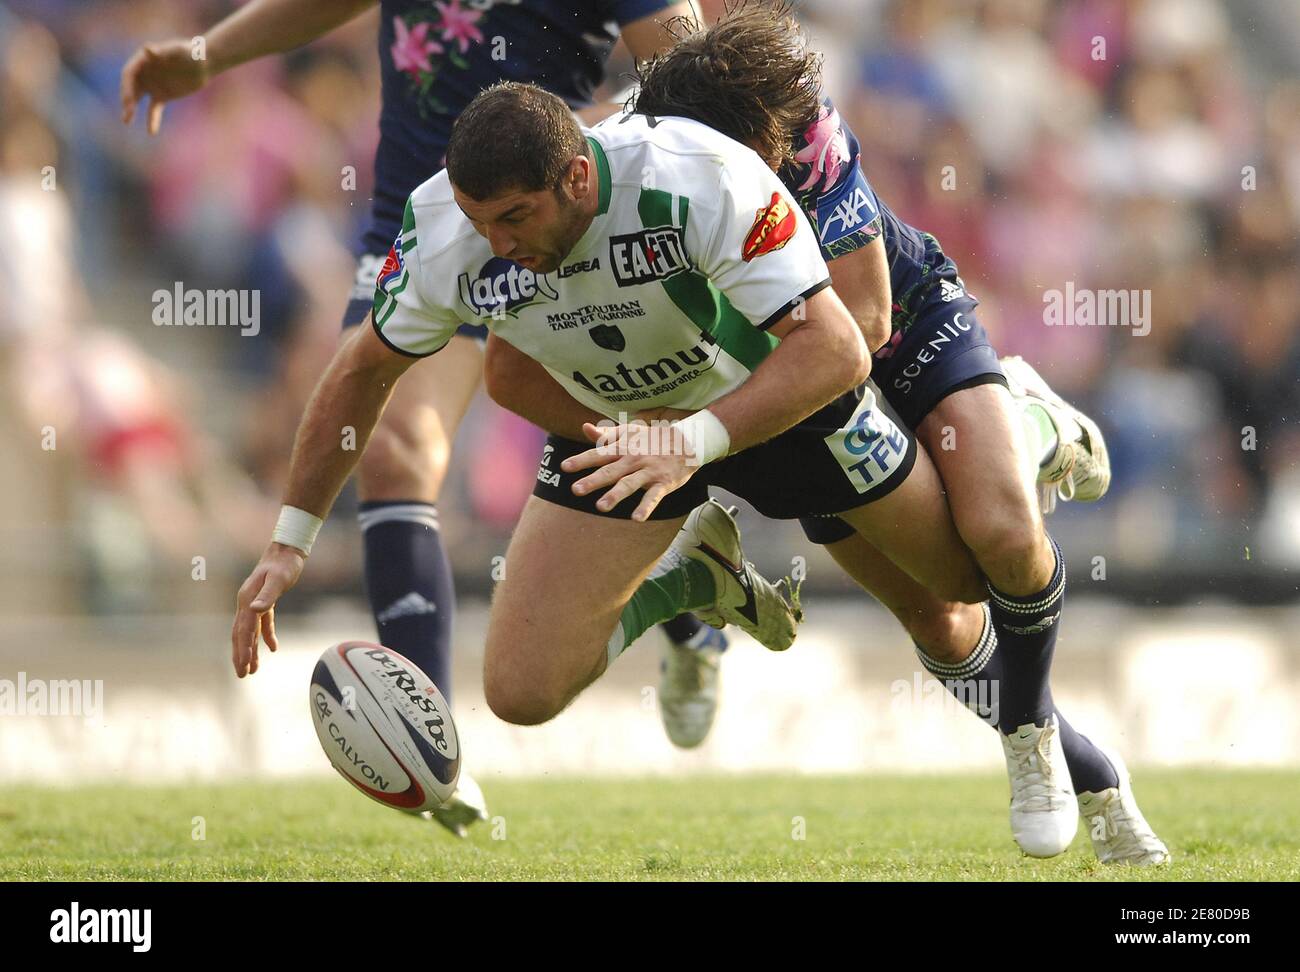 Montauban's Marc Raynaud takled by Stade Francais' Christophe Dominici during the French Top 14 rugby union match, Stade Francais vs Montauban, at the Jean Bouin stadium, in Paris, France, on April 28, 2007. Stade Francais won 24-17. Photo by Nicolas Gouhier/Cameleon/ABACAPRESS.COM Stock Photo